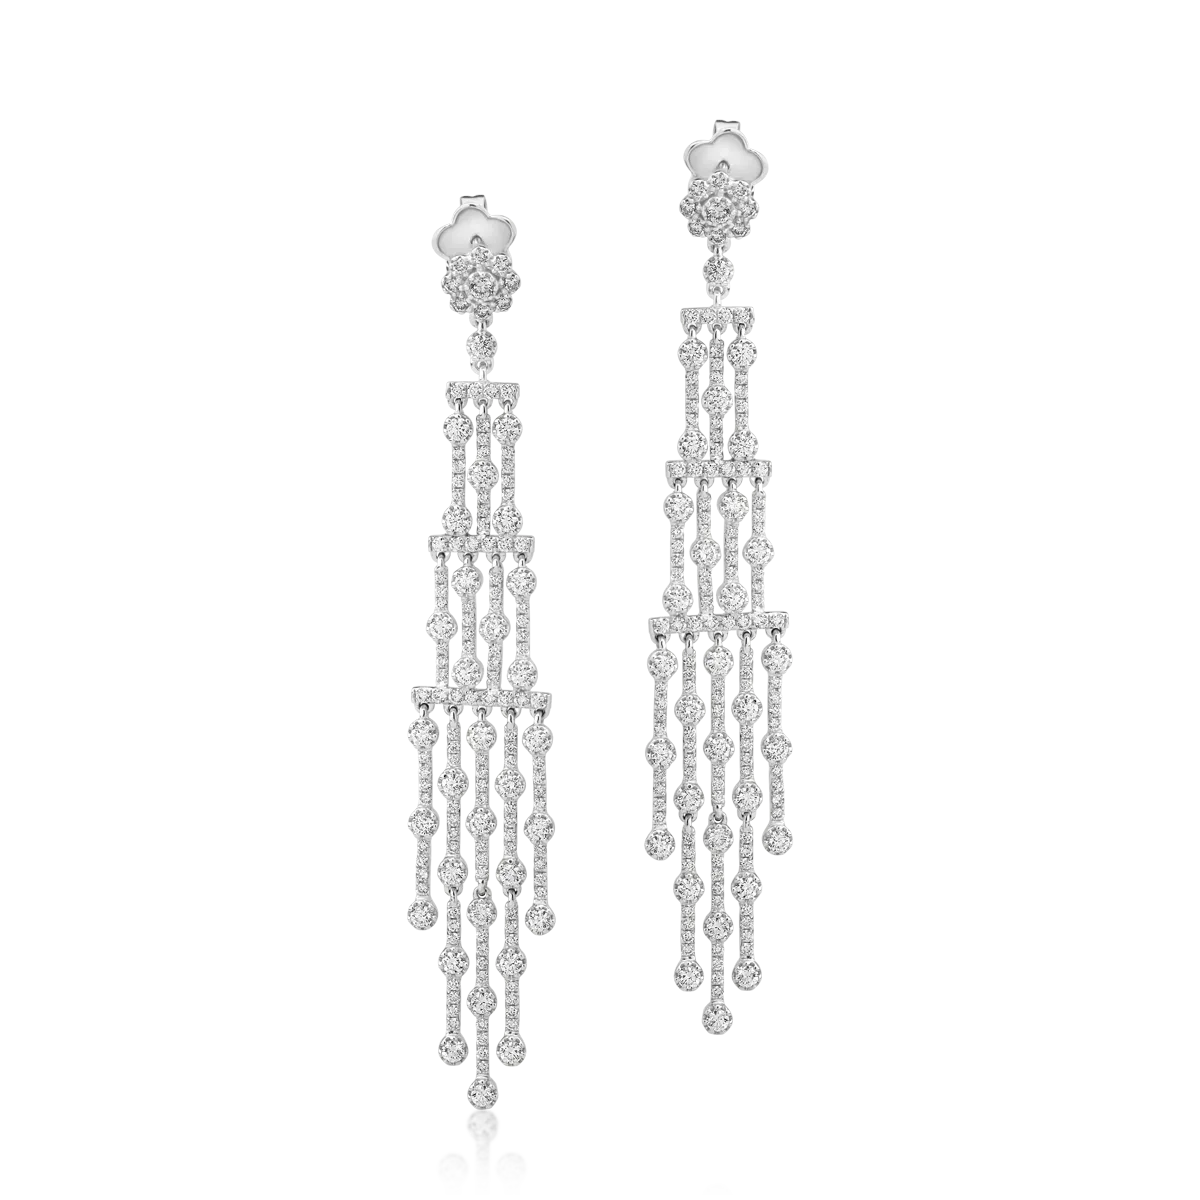 18K white gold earrings with 3.92ct diamonds